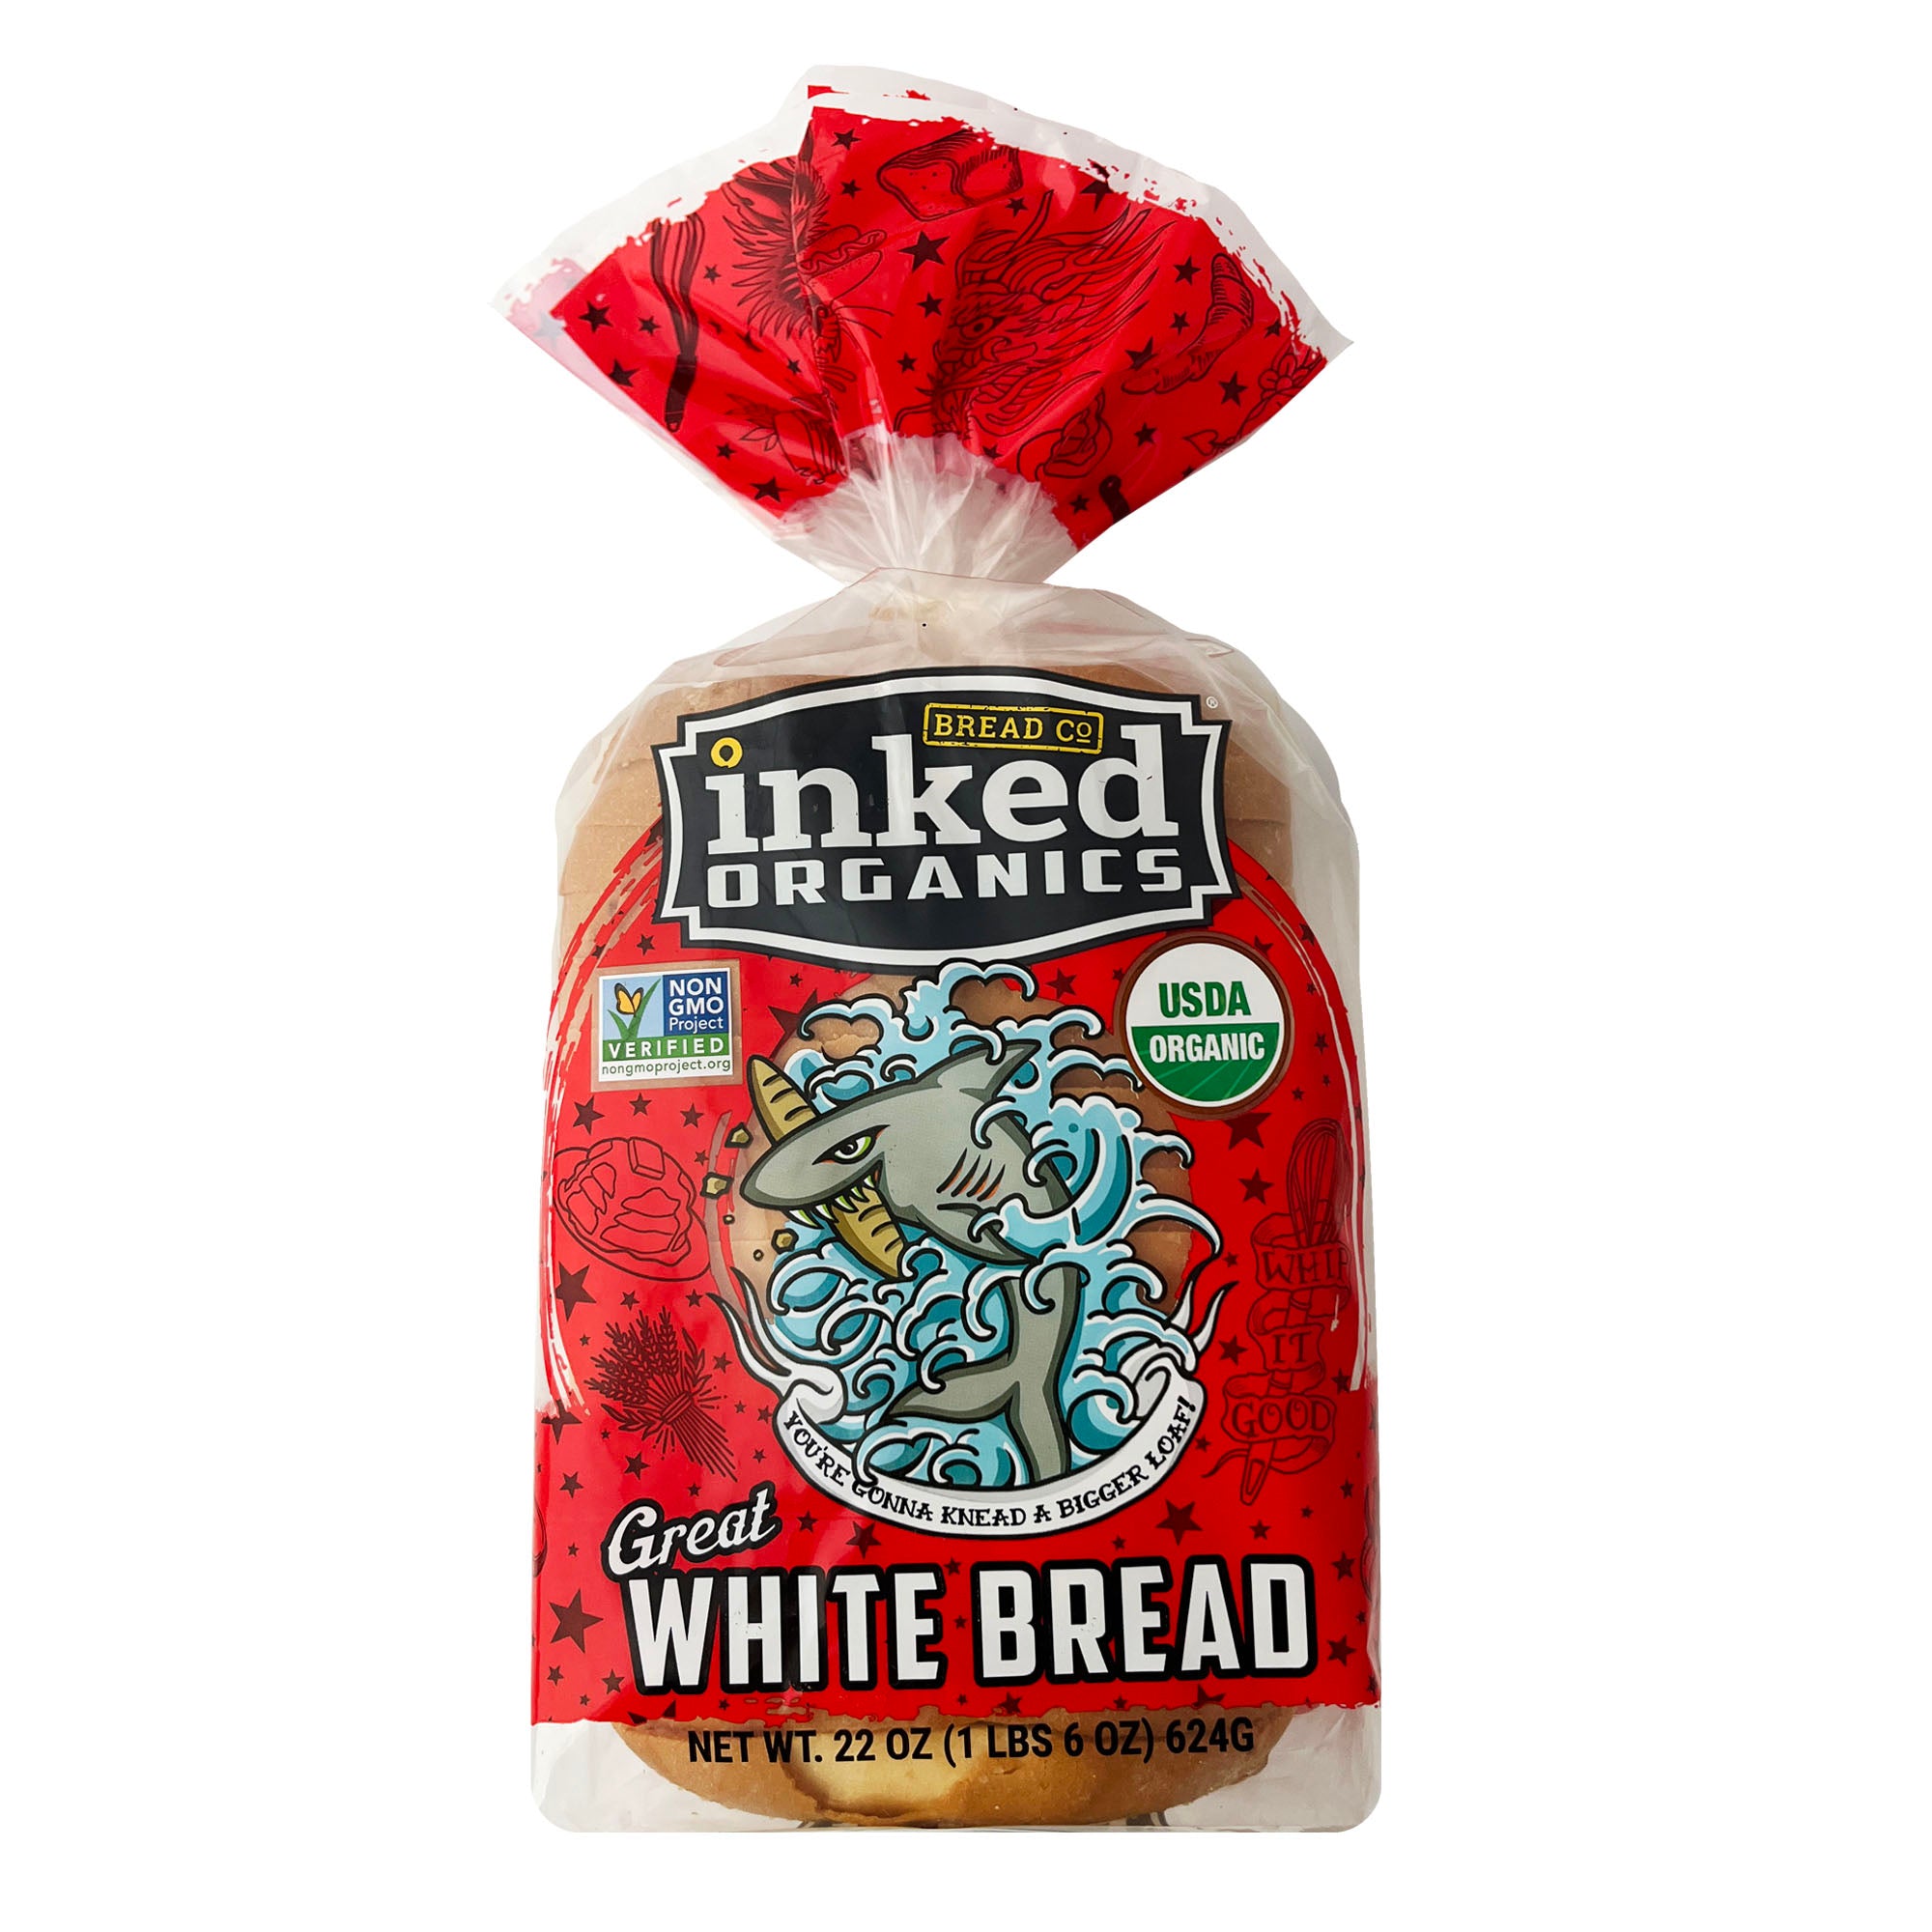 Great White Bread (Not available for individual sale)